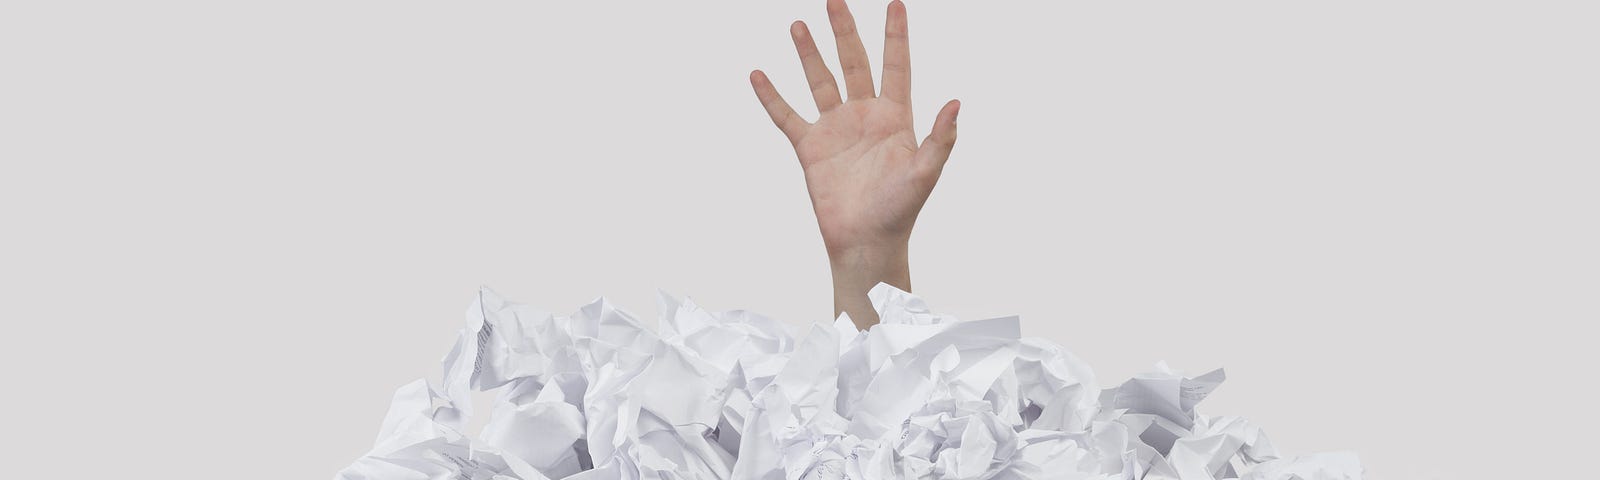 A hand emerging from a pile of scrunched up papers, looking for help